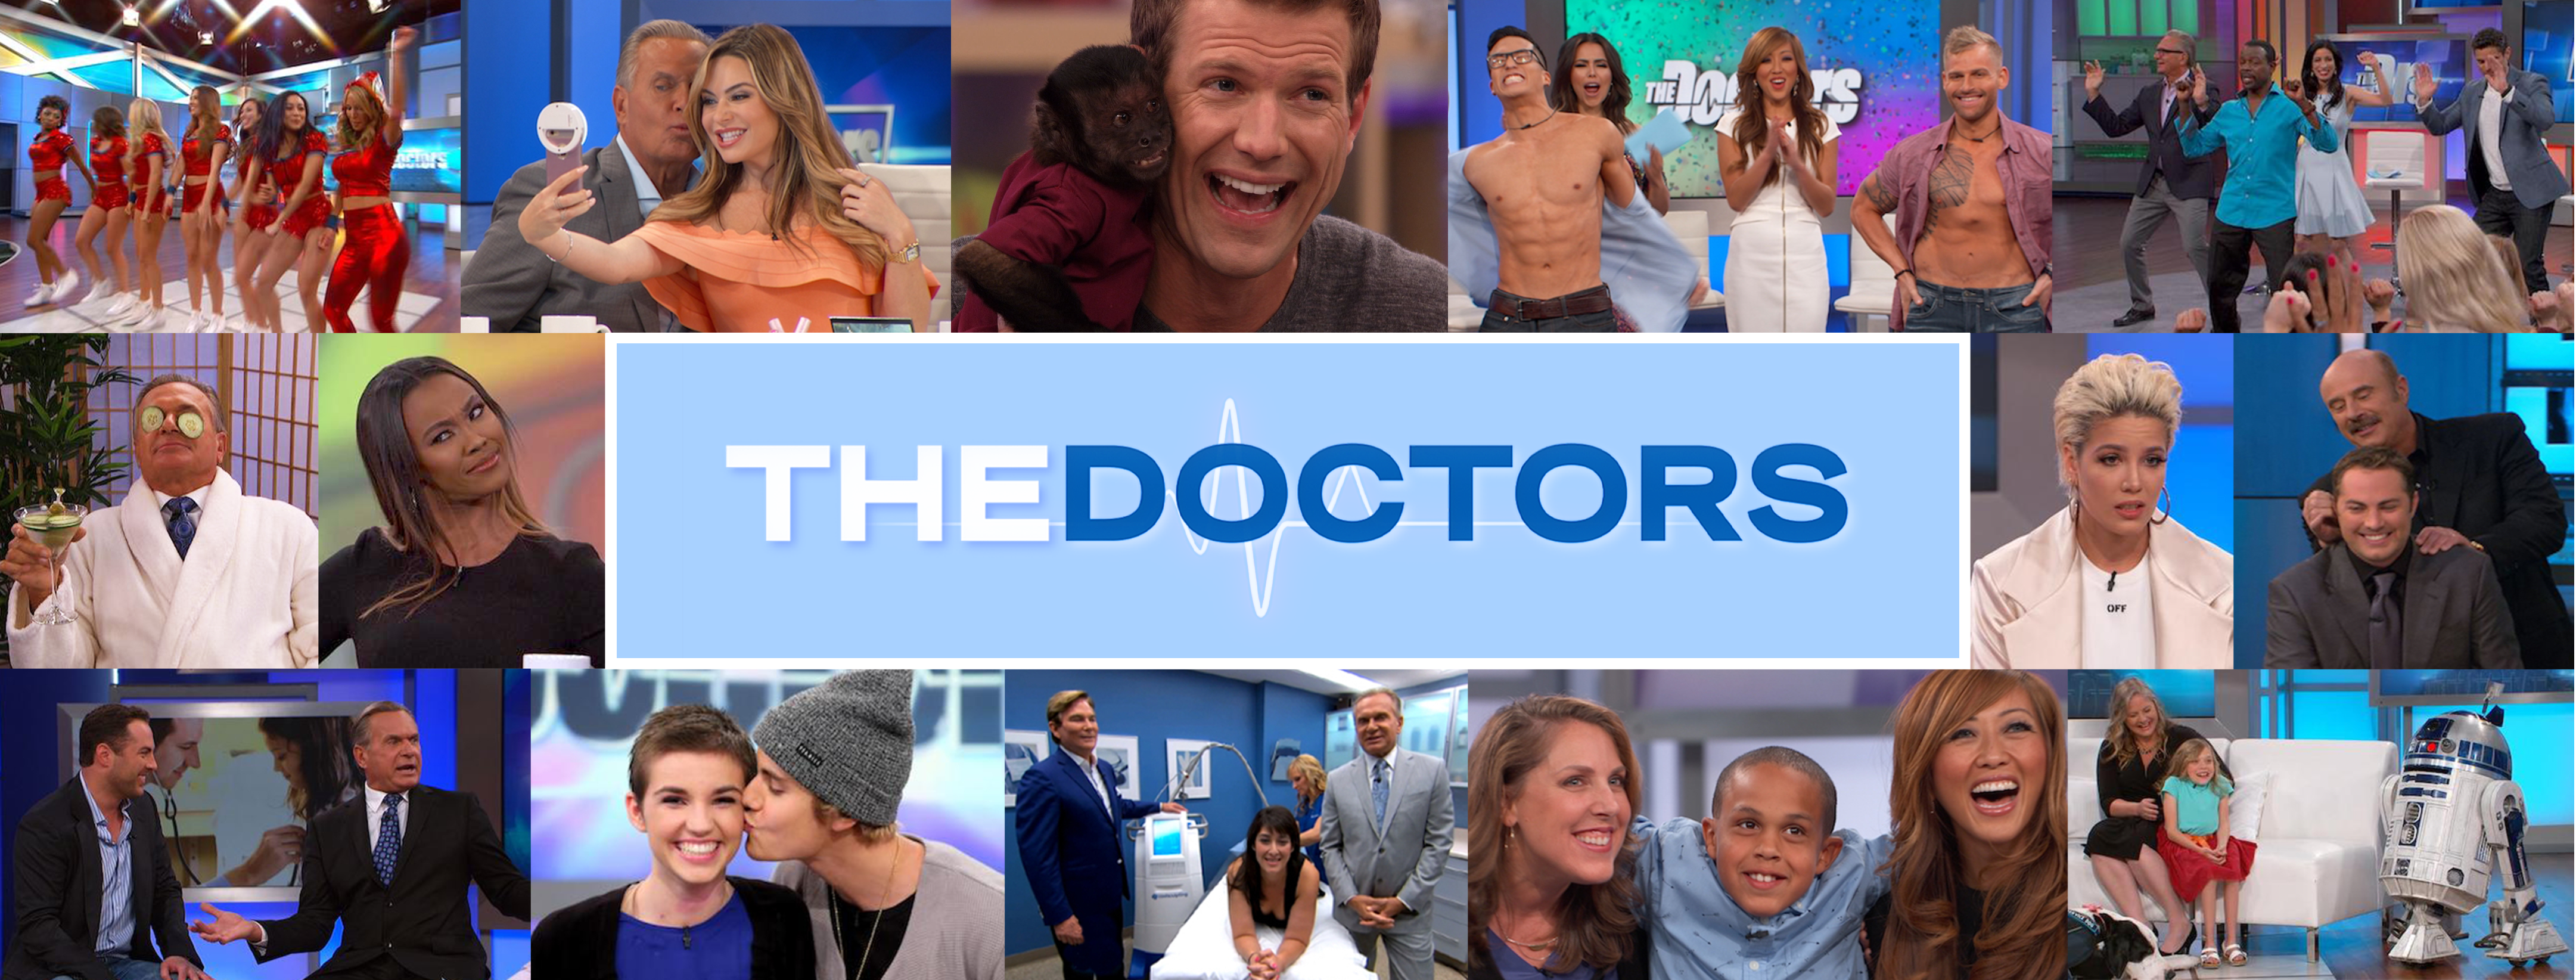 Tmi Embarrassing Body Issues Severed Hand Surgery The Doctors Tv Show